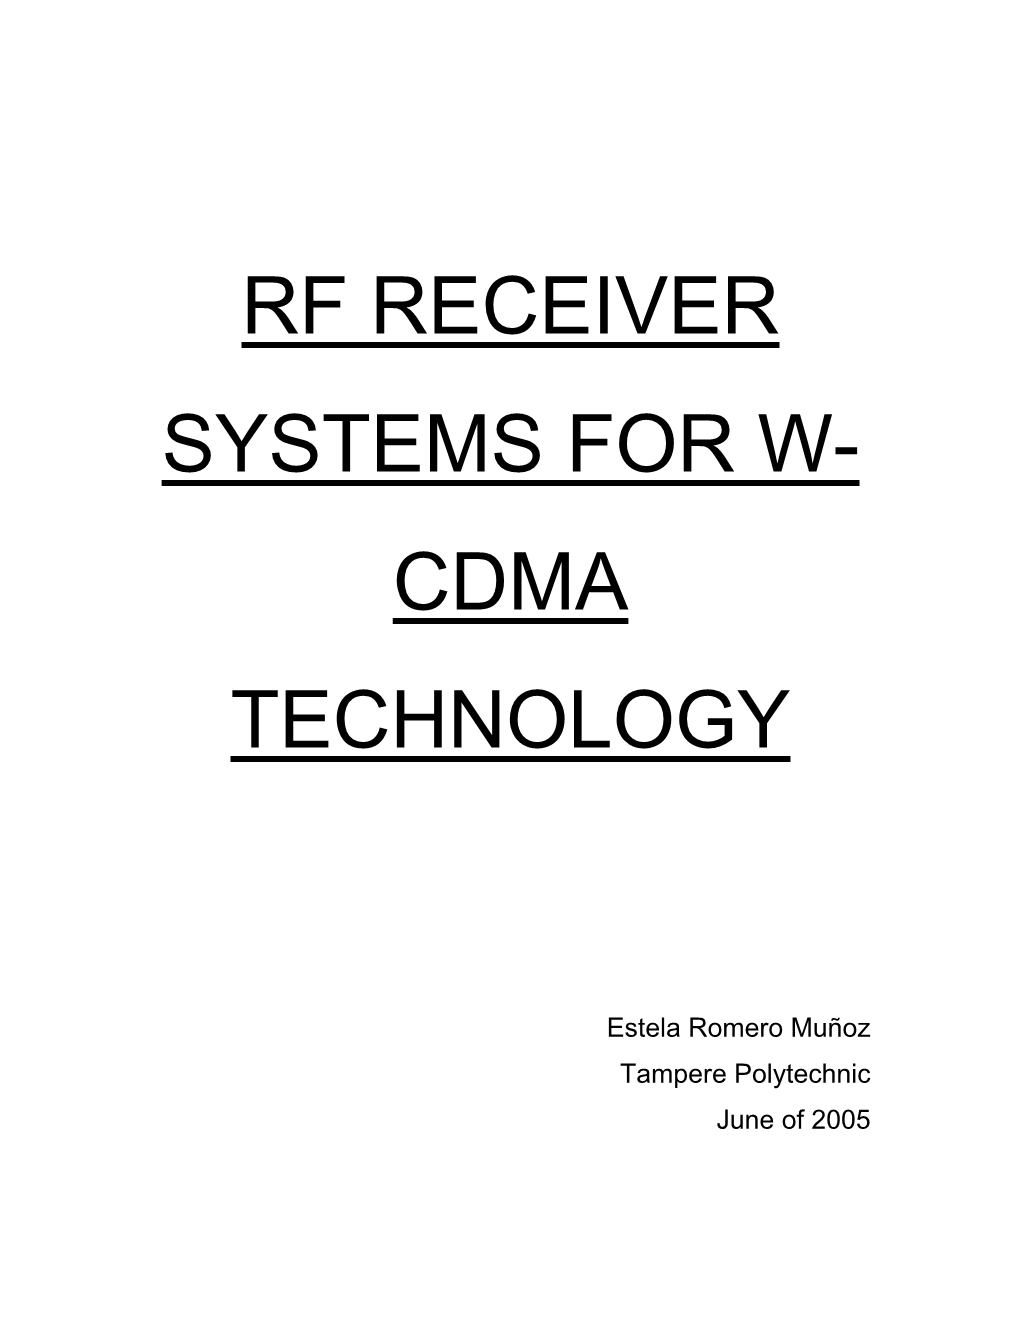 RF Receiver Systems for W-CDMA Technology